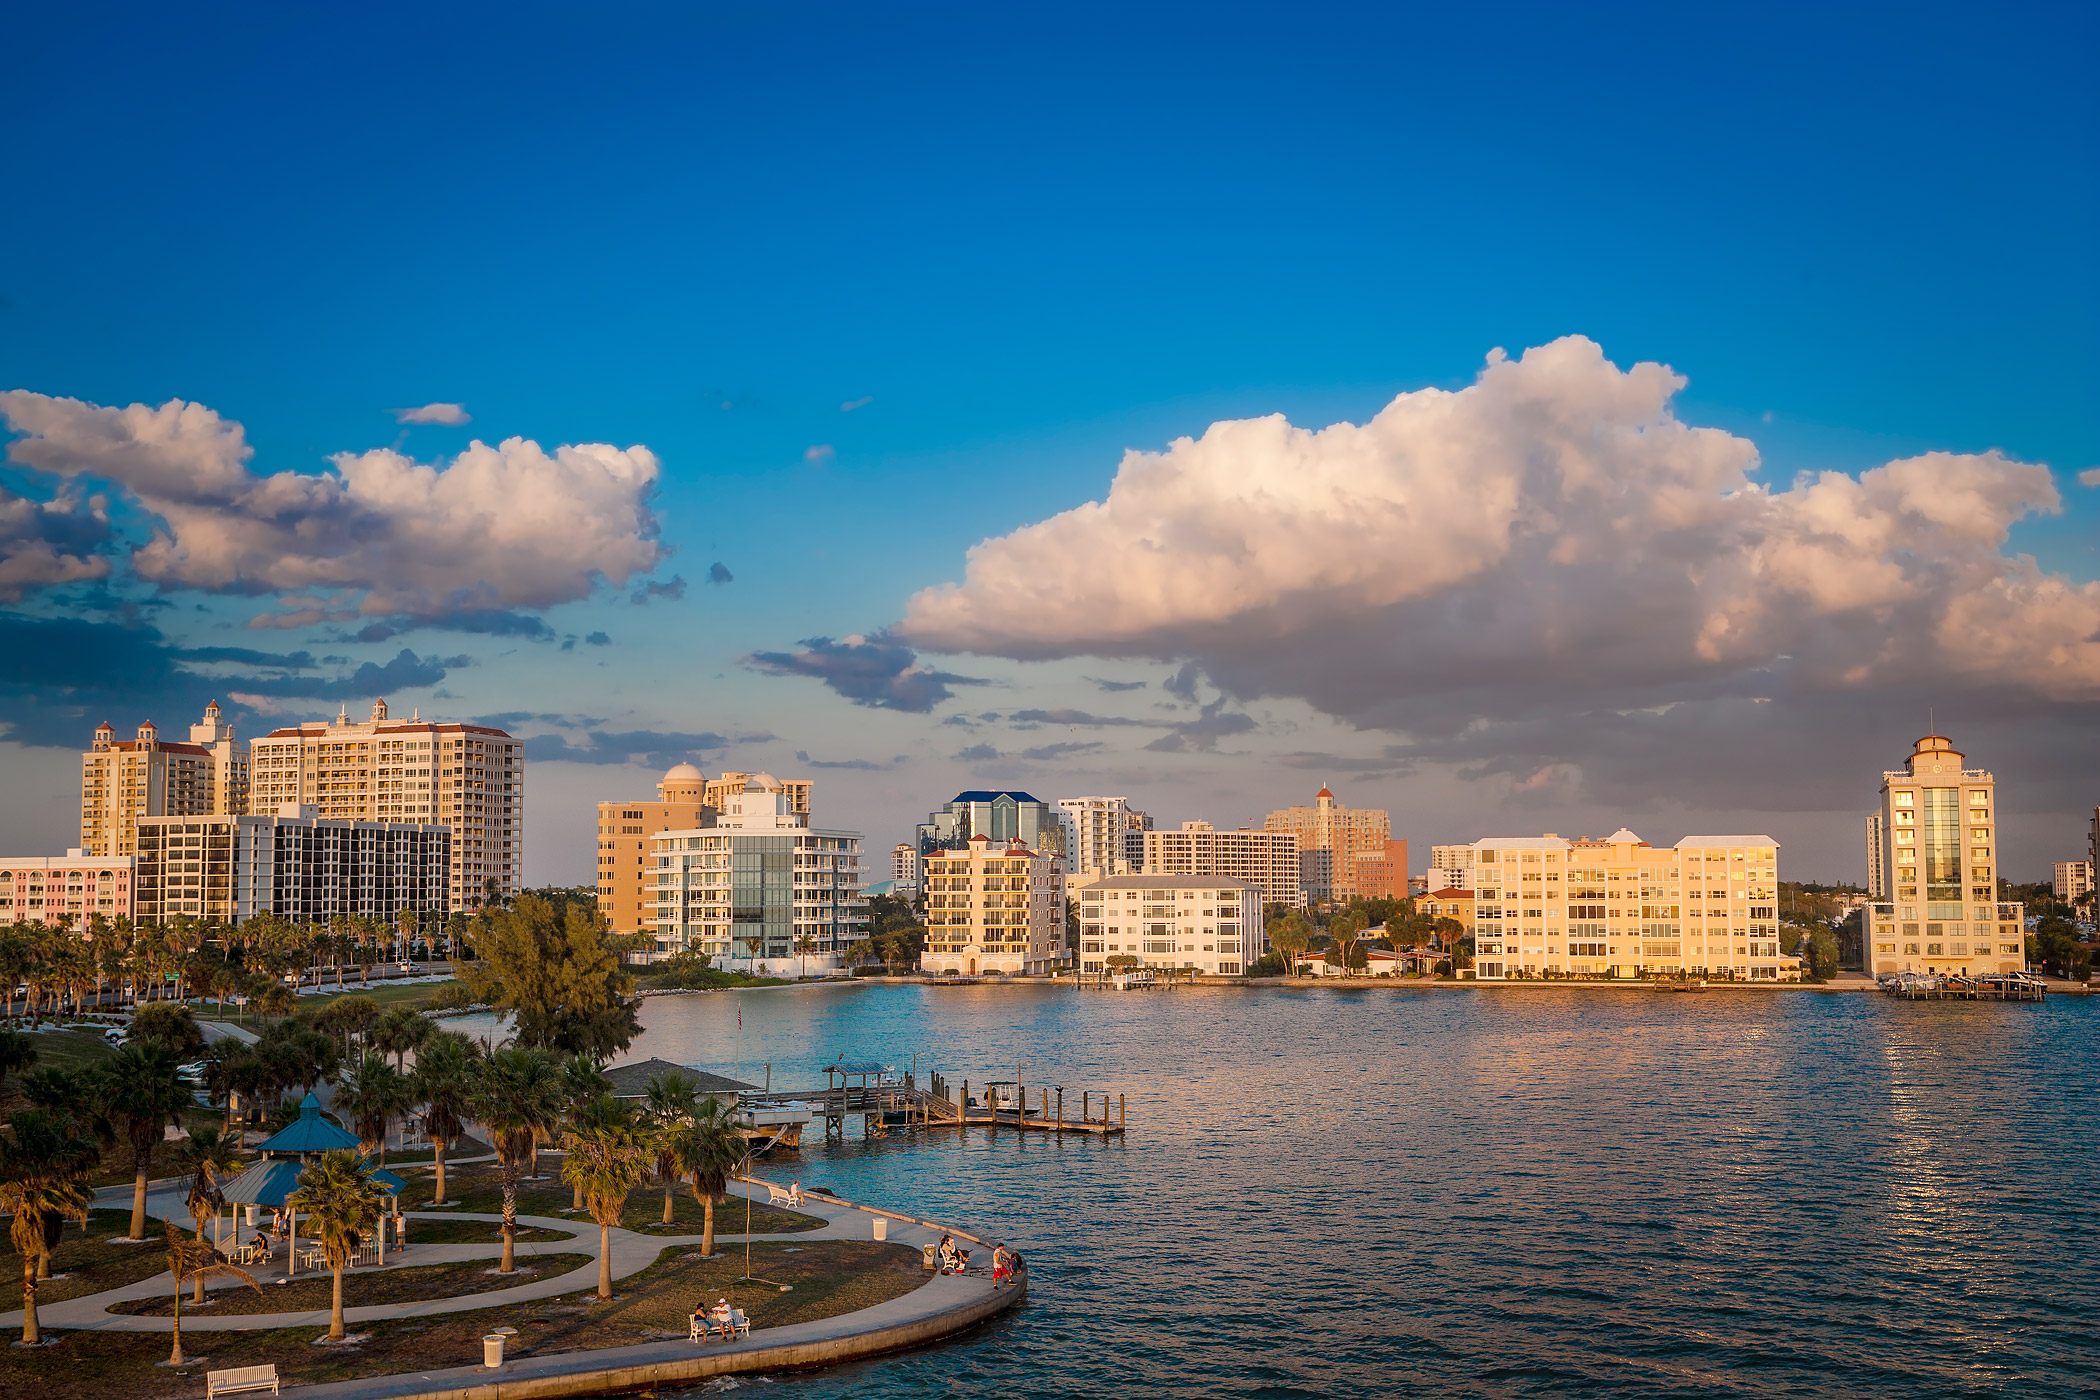 The waterfront in Sarasota, Florida (Getty Images)